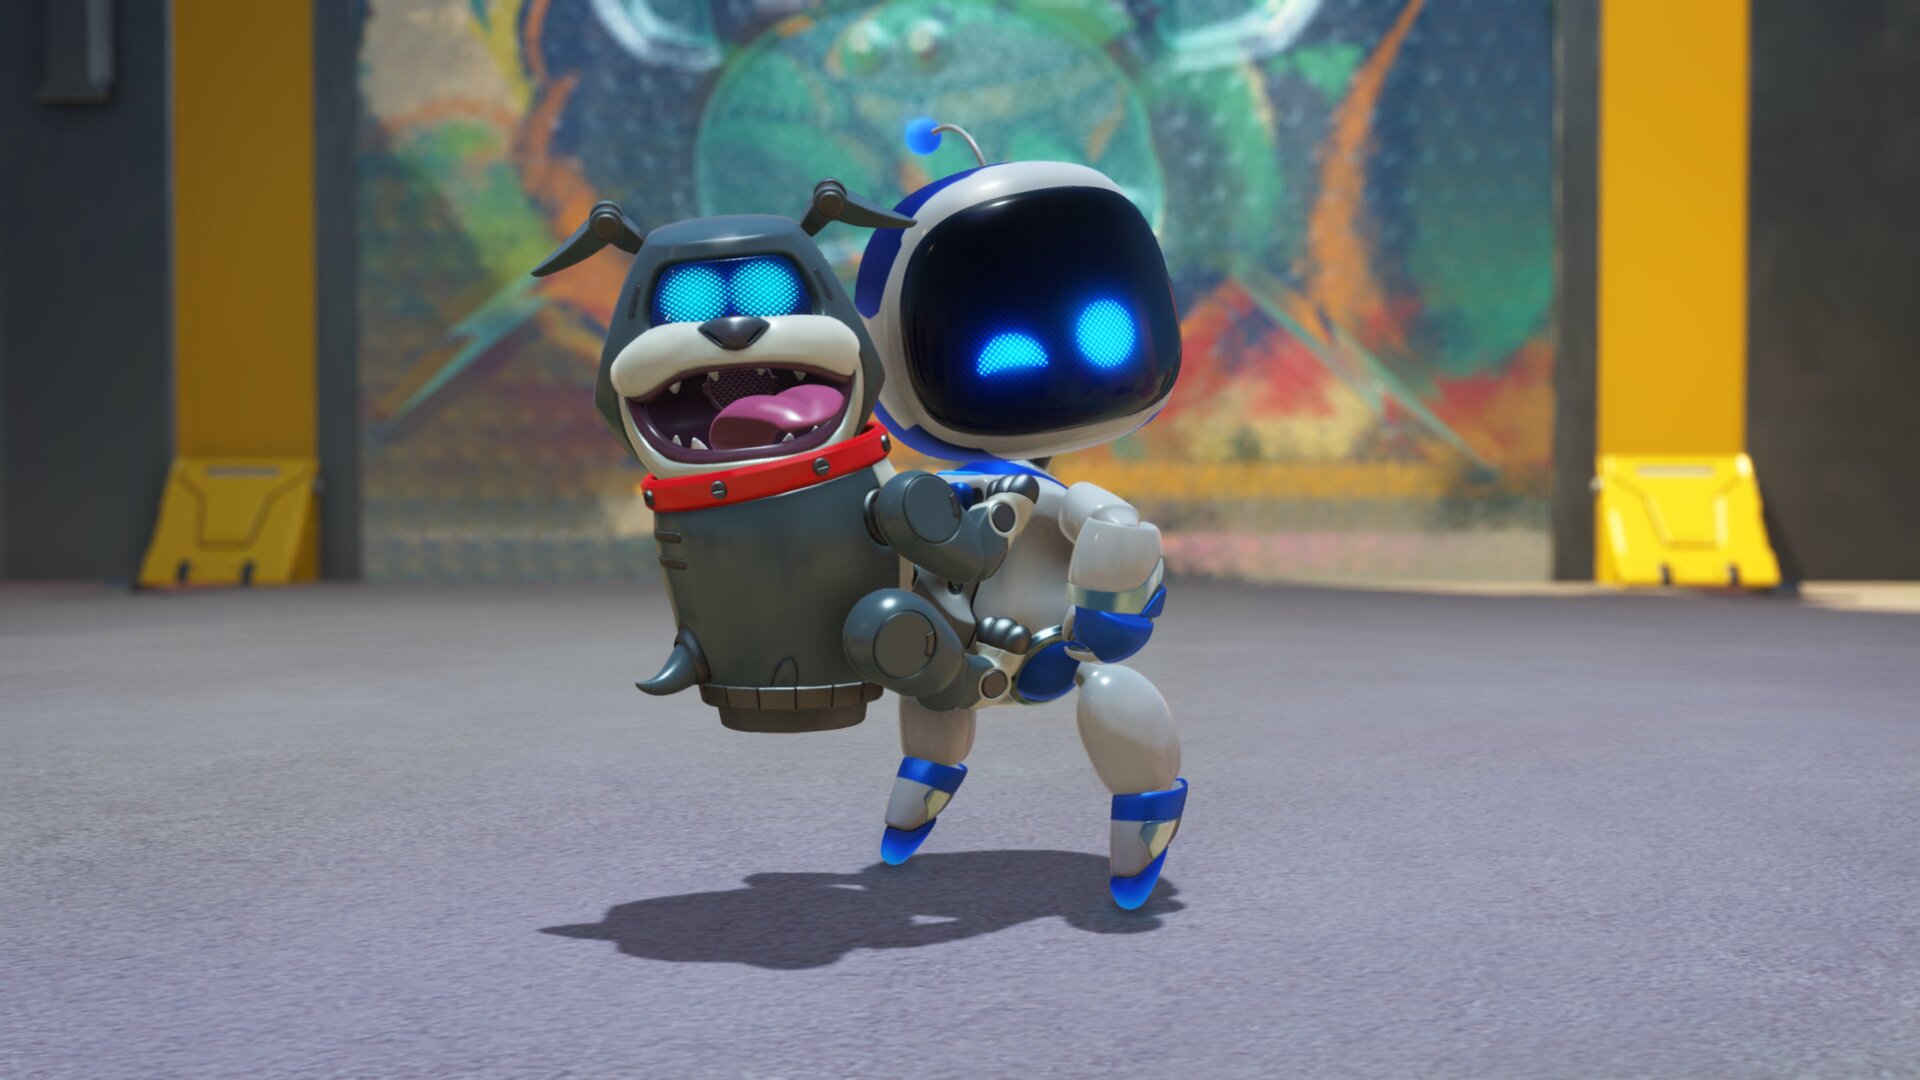 Astro Bot Is the Mascot Game PlayStation Needs Right Now